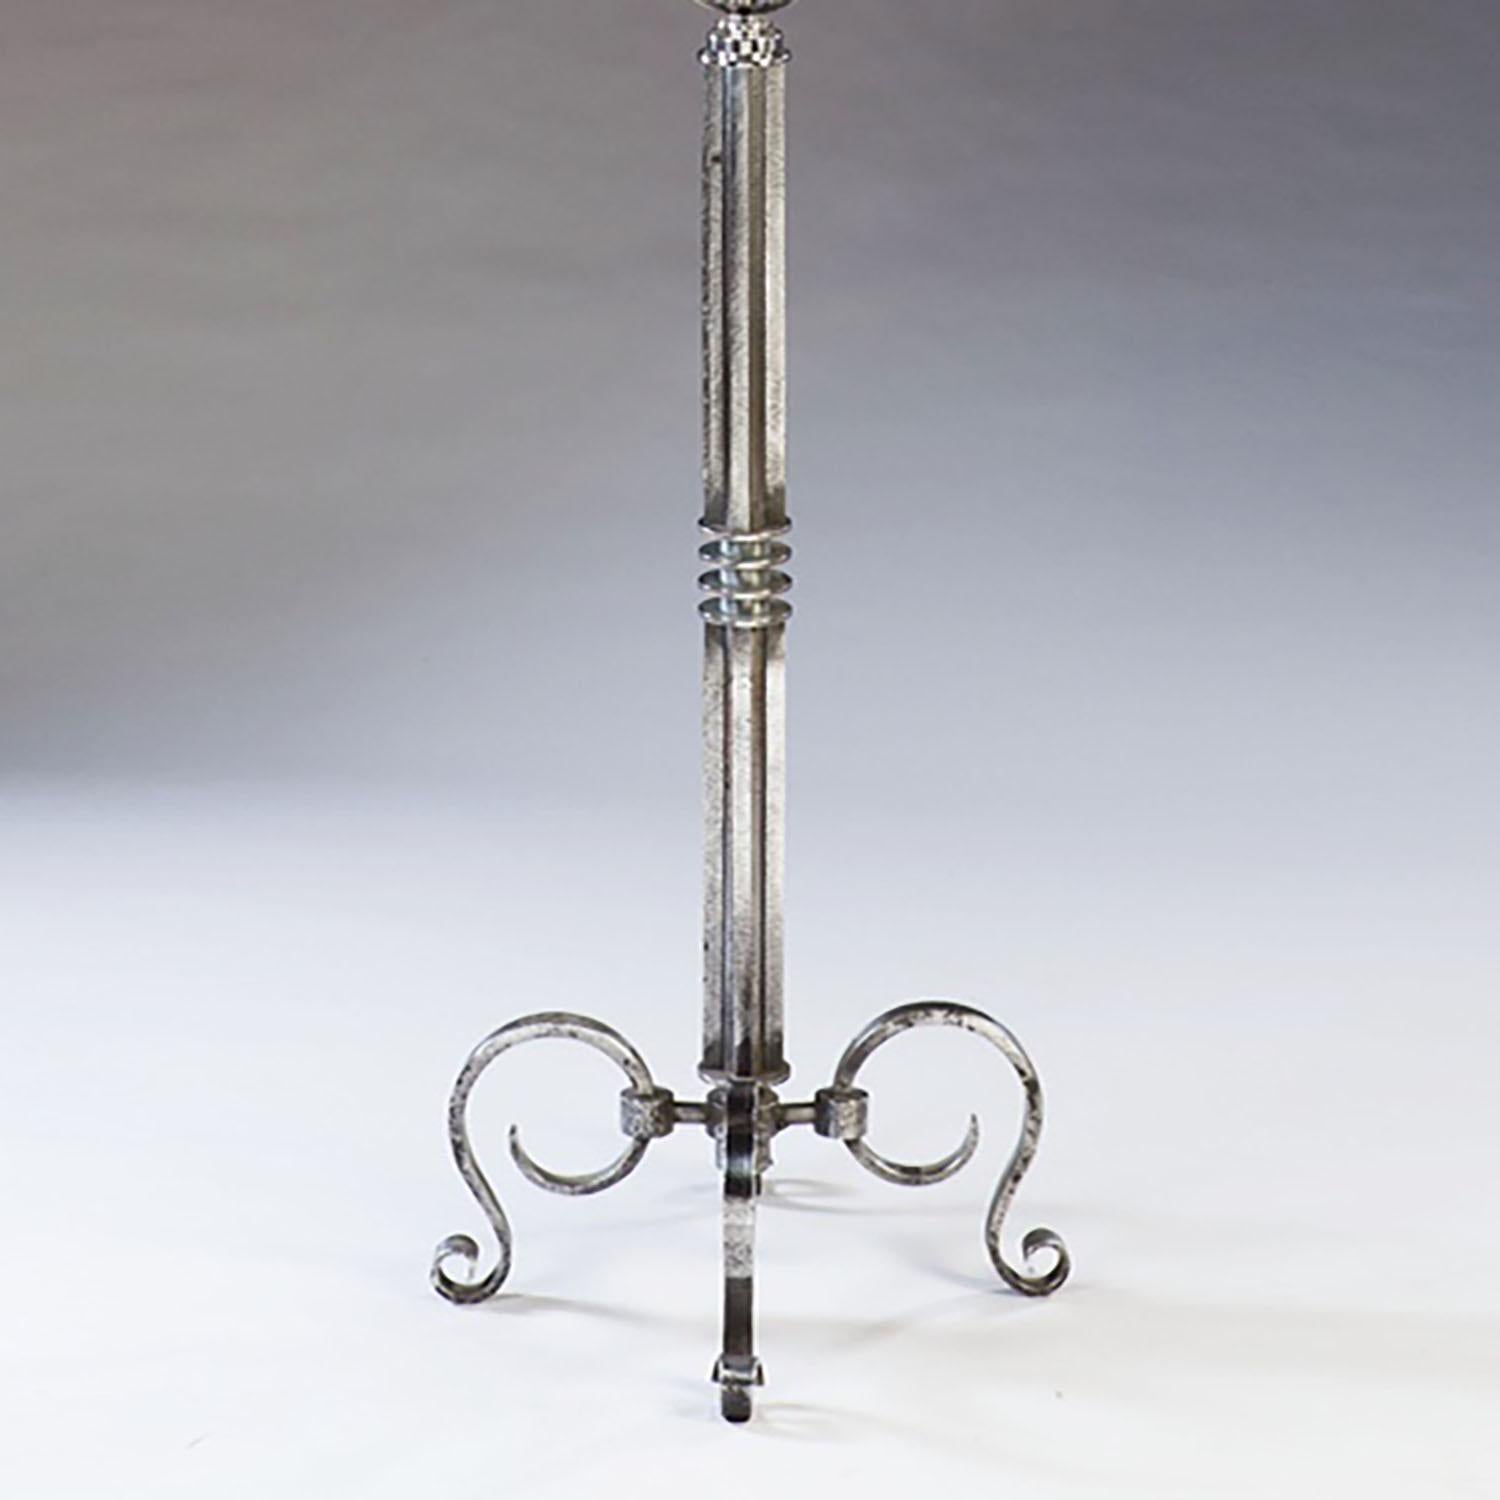 A rare and unusual modernist iron lampstand, fashioned as a column with multiple ribs and collars and a central Astrolabe, standing on a tripod of scroll legs and surmounted by a stylized globe with a ribbed cup above. Attributed to Gilbert